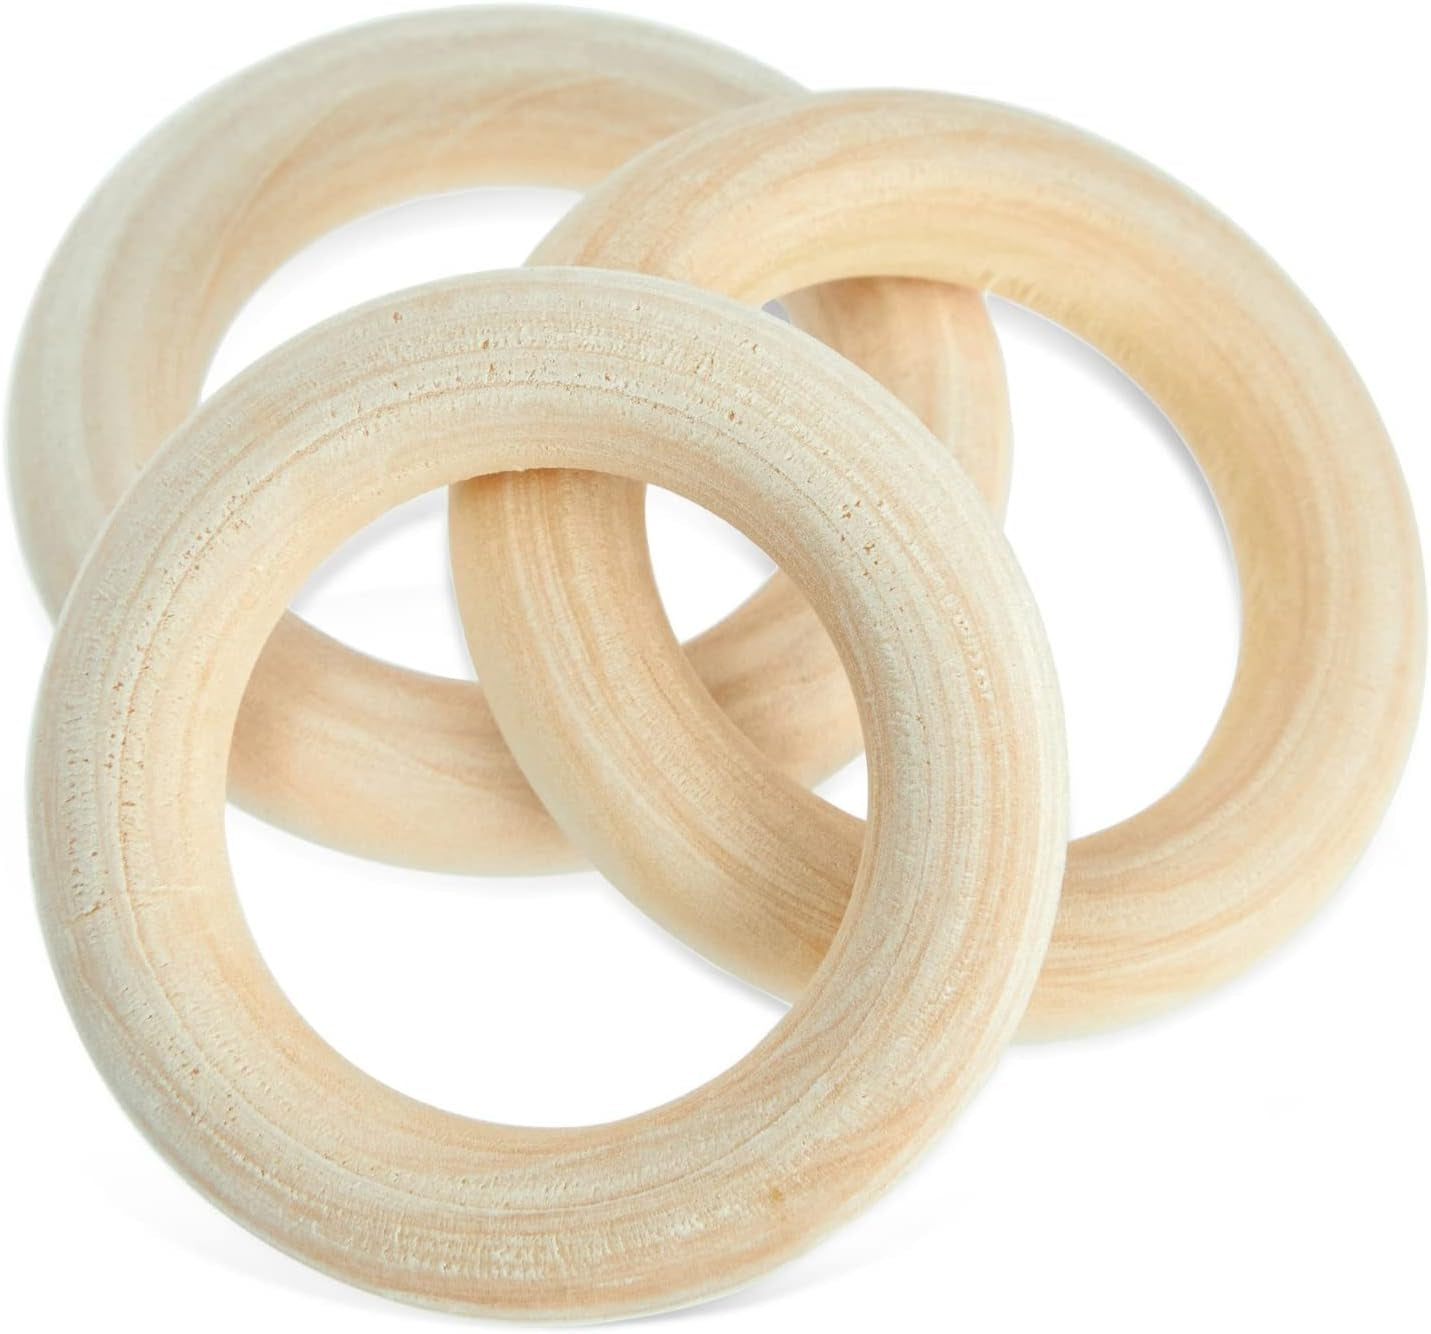 Set of 50 Wooden Beads and 30 Wood Rings for Macrame, DIY Pendant Connectors, Wall Hanging Craft (Rings 2.2 In/Beads 20Mm)